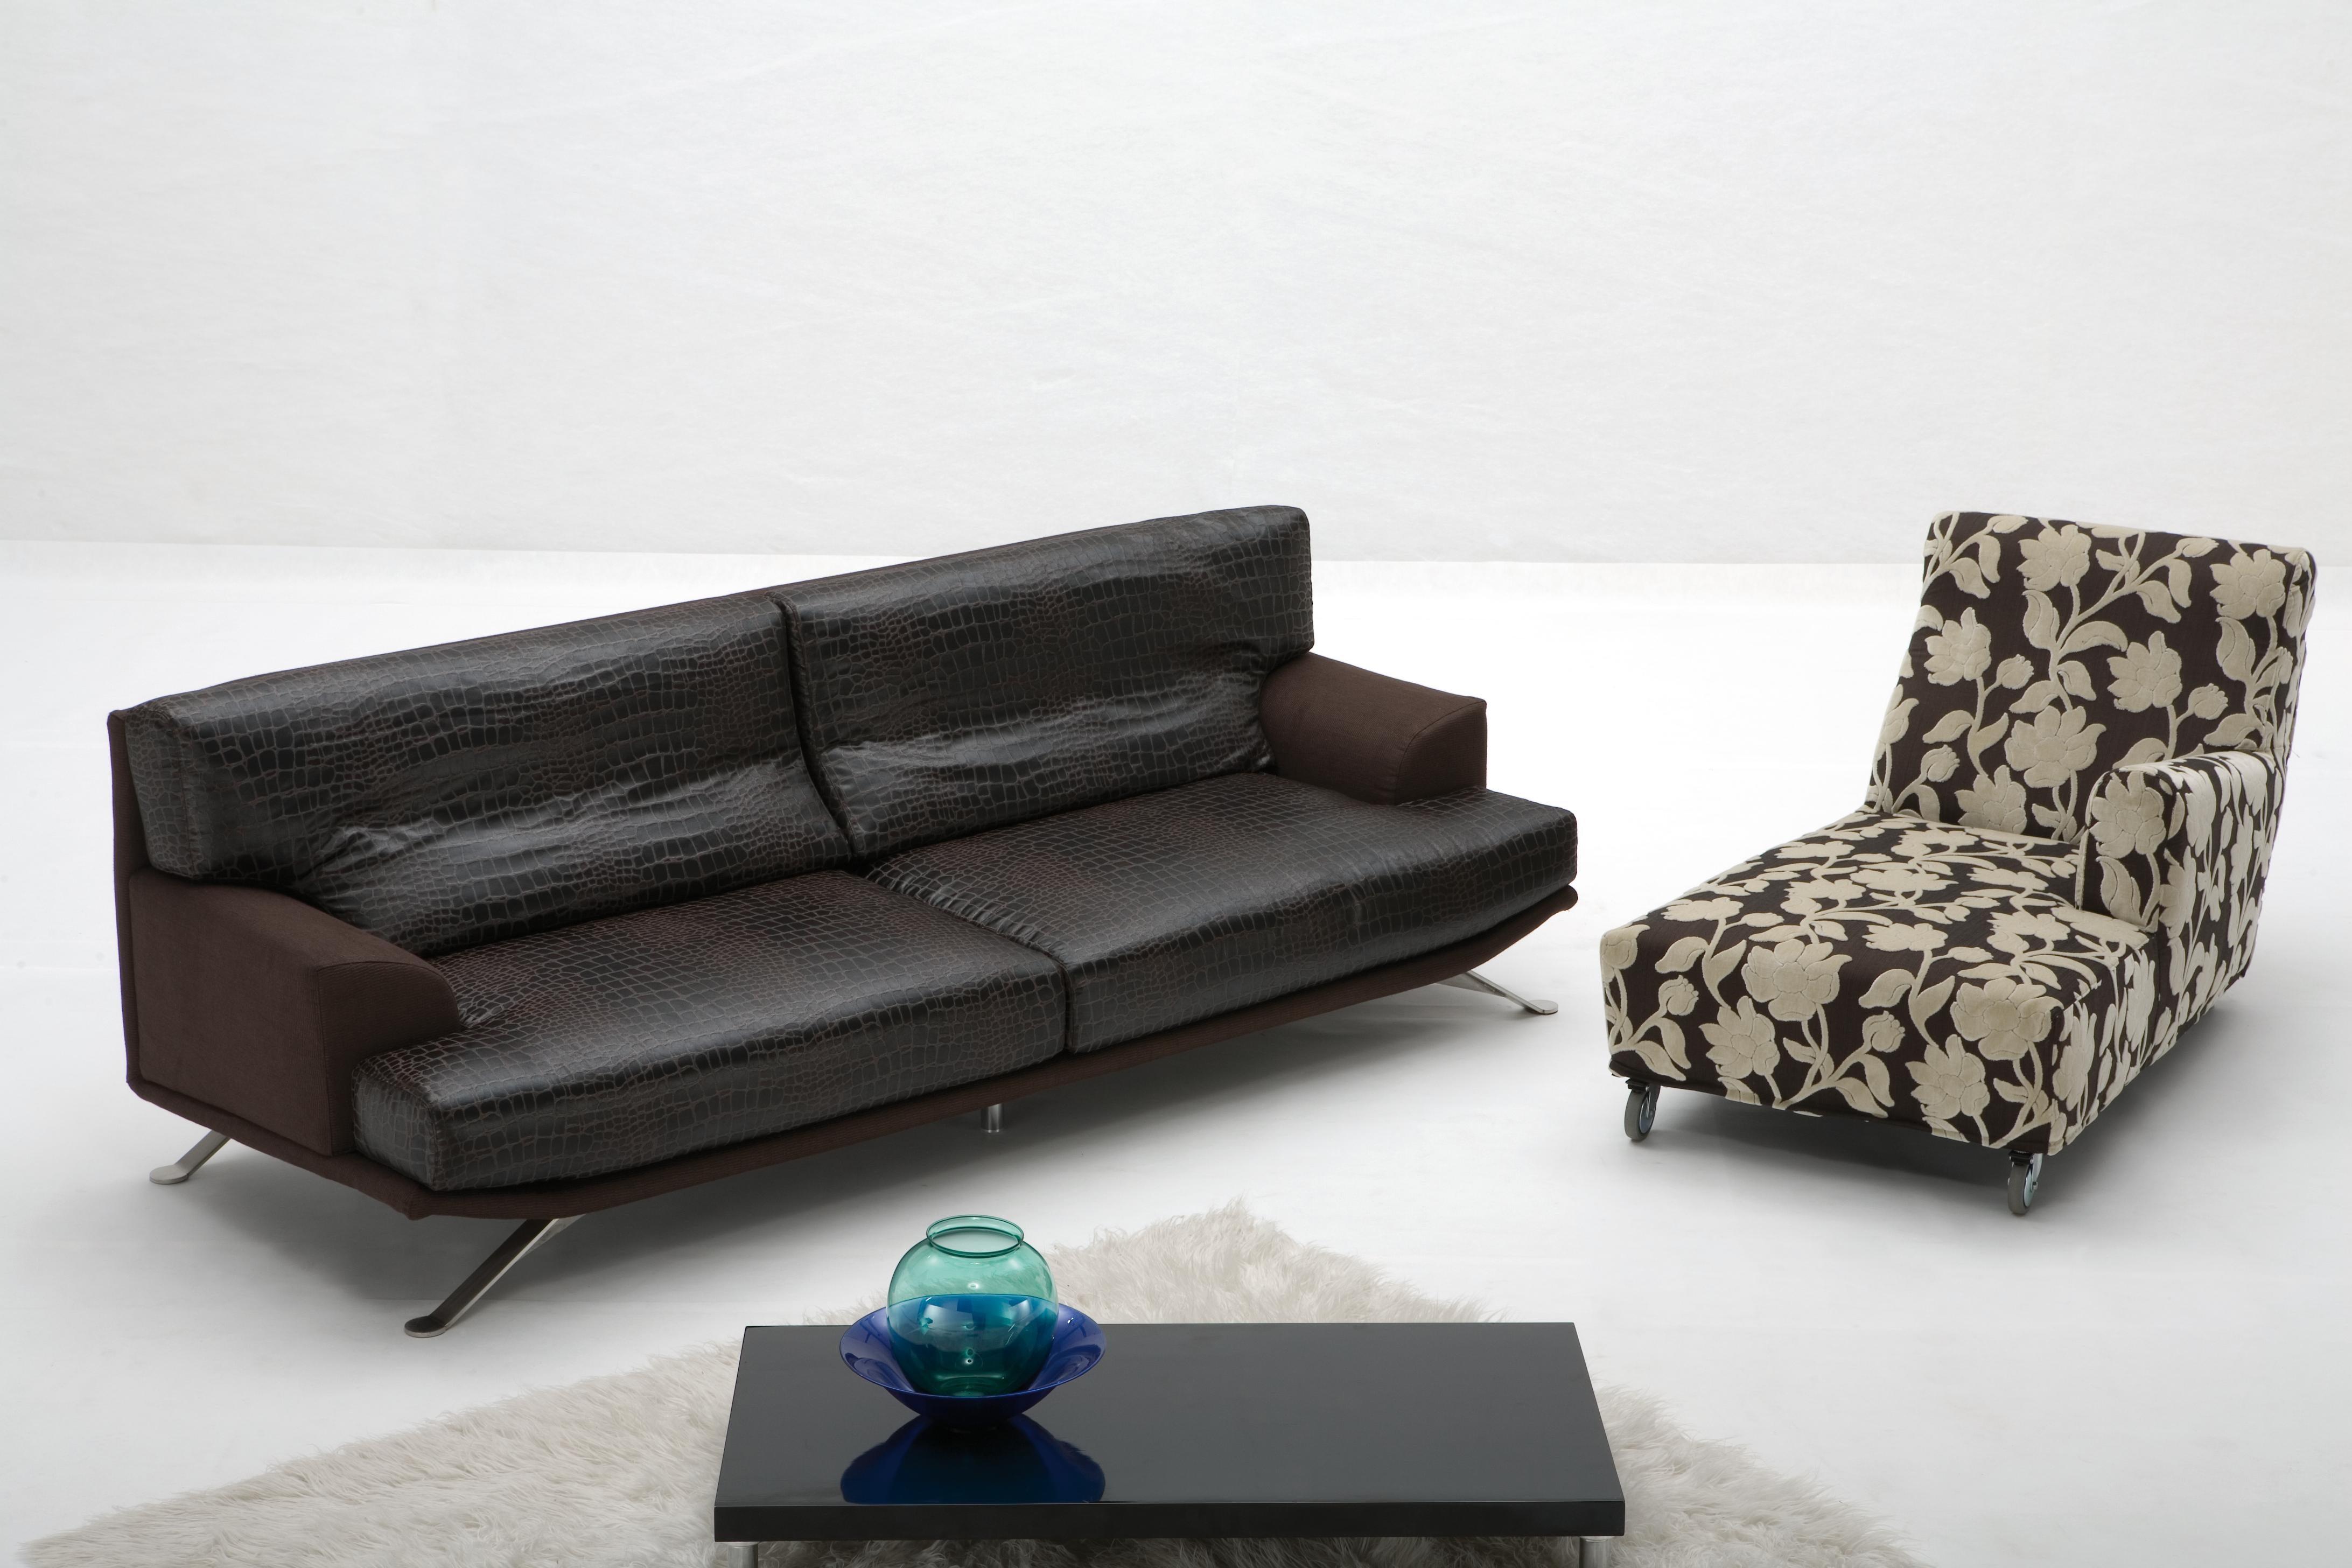 Late 20th Century Giovannetti, Contemporary 2 Seater Sofa from the 1970s by P. Piva Cream 